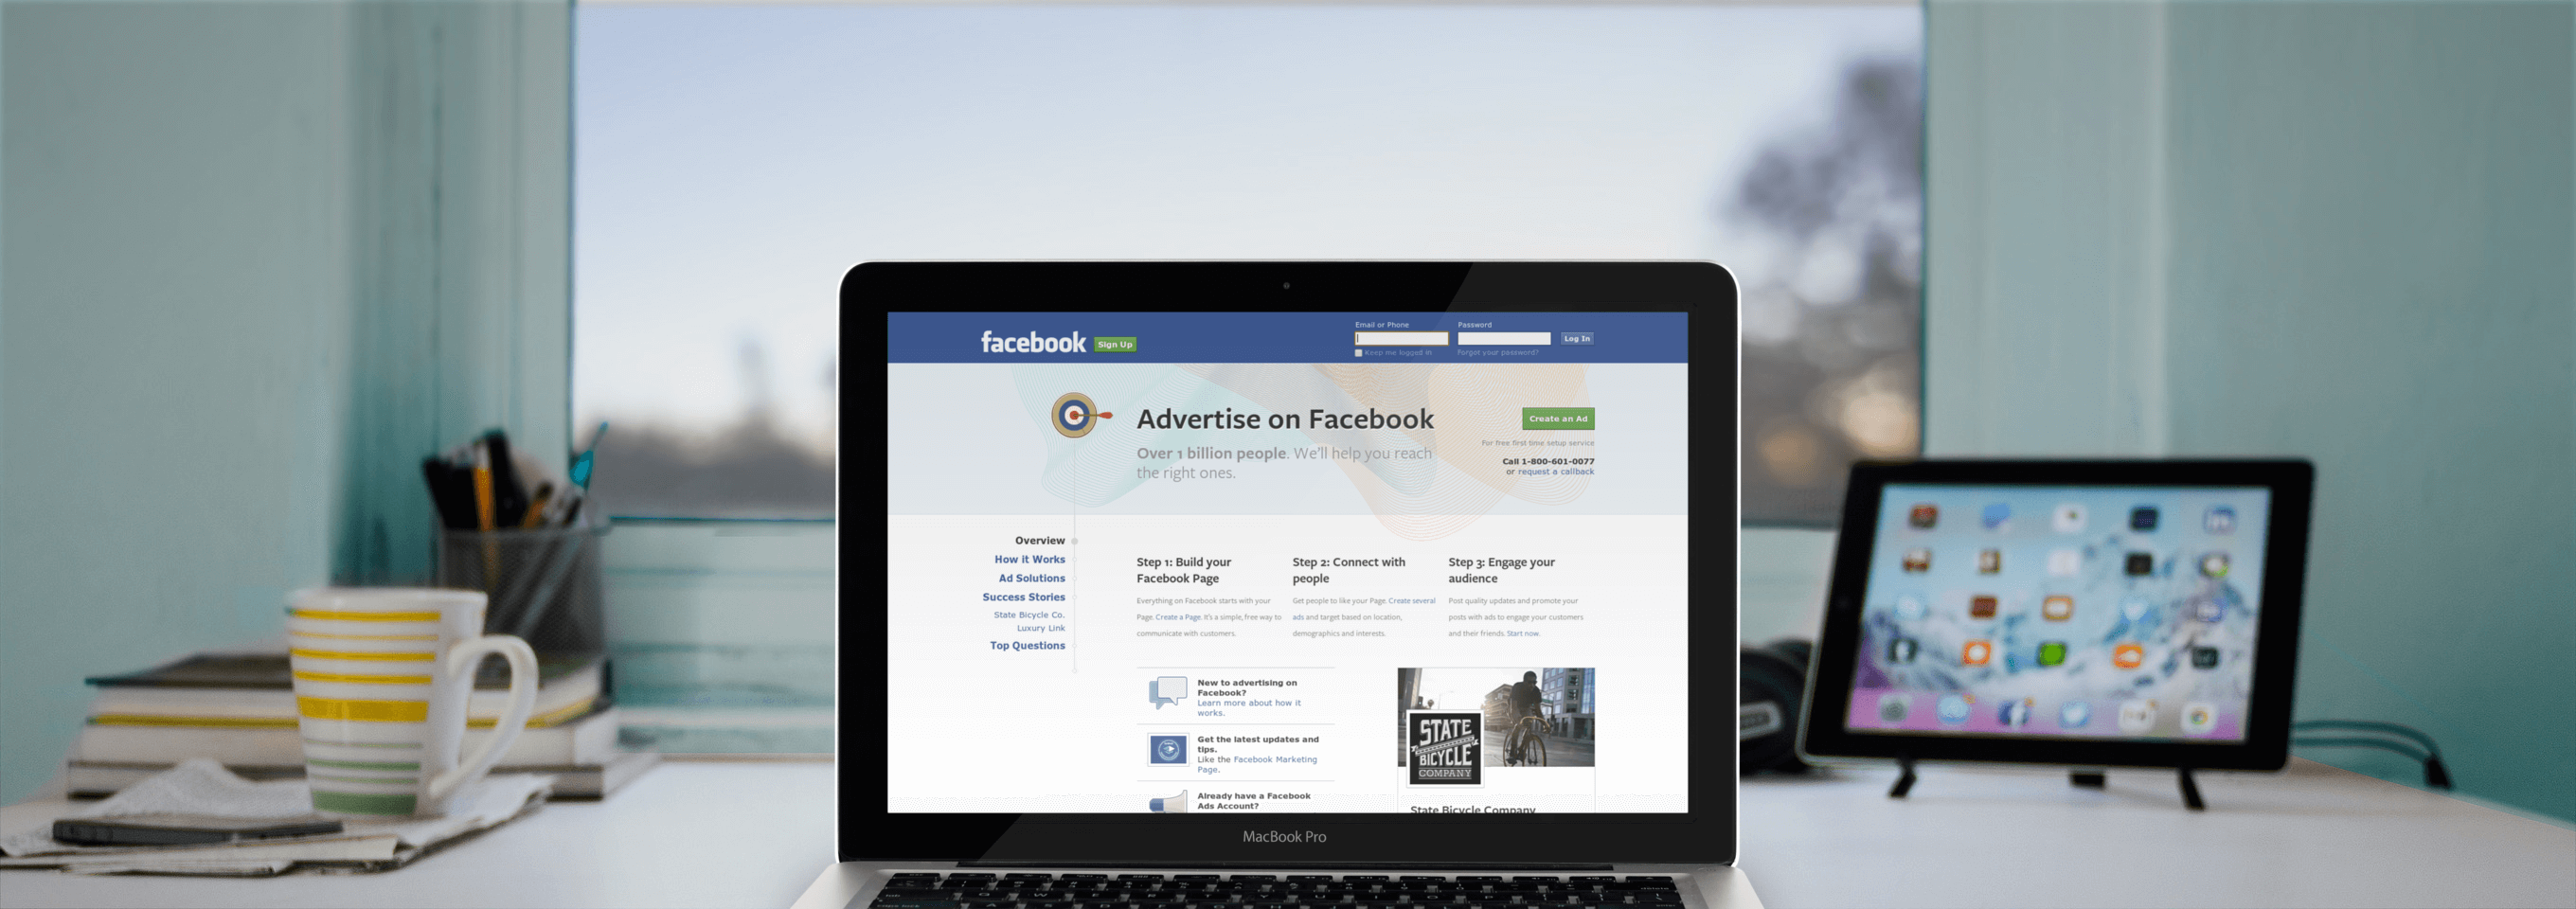 5 Facebook Advertising Tools That Will Save You Time And Money